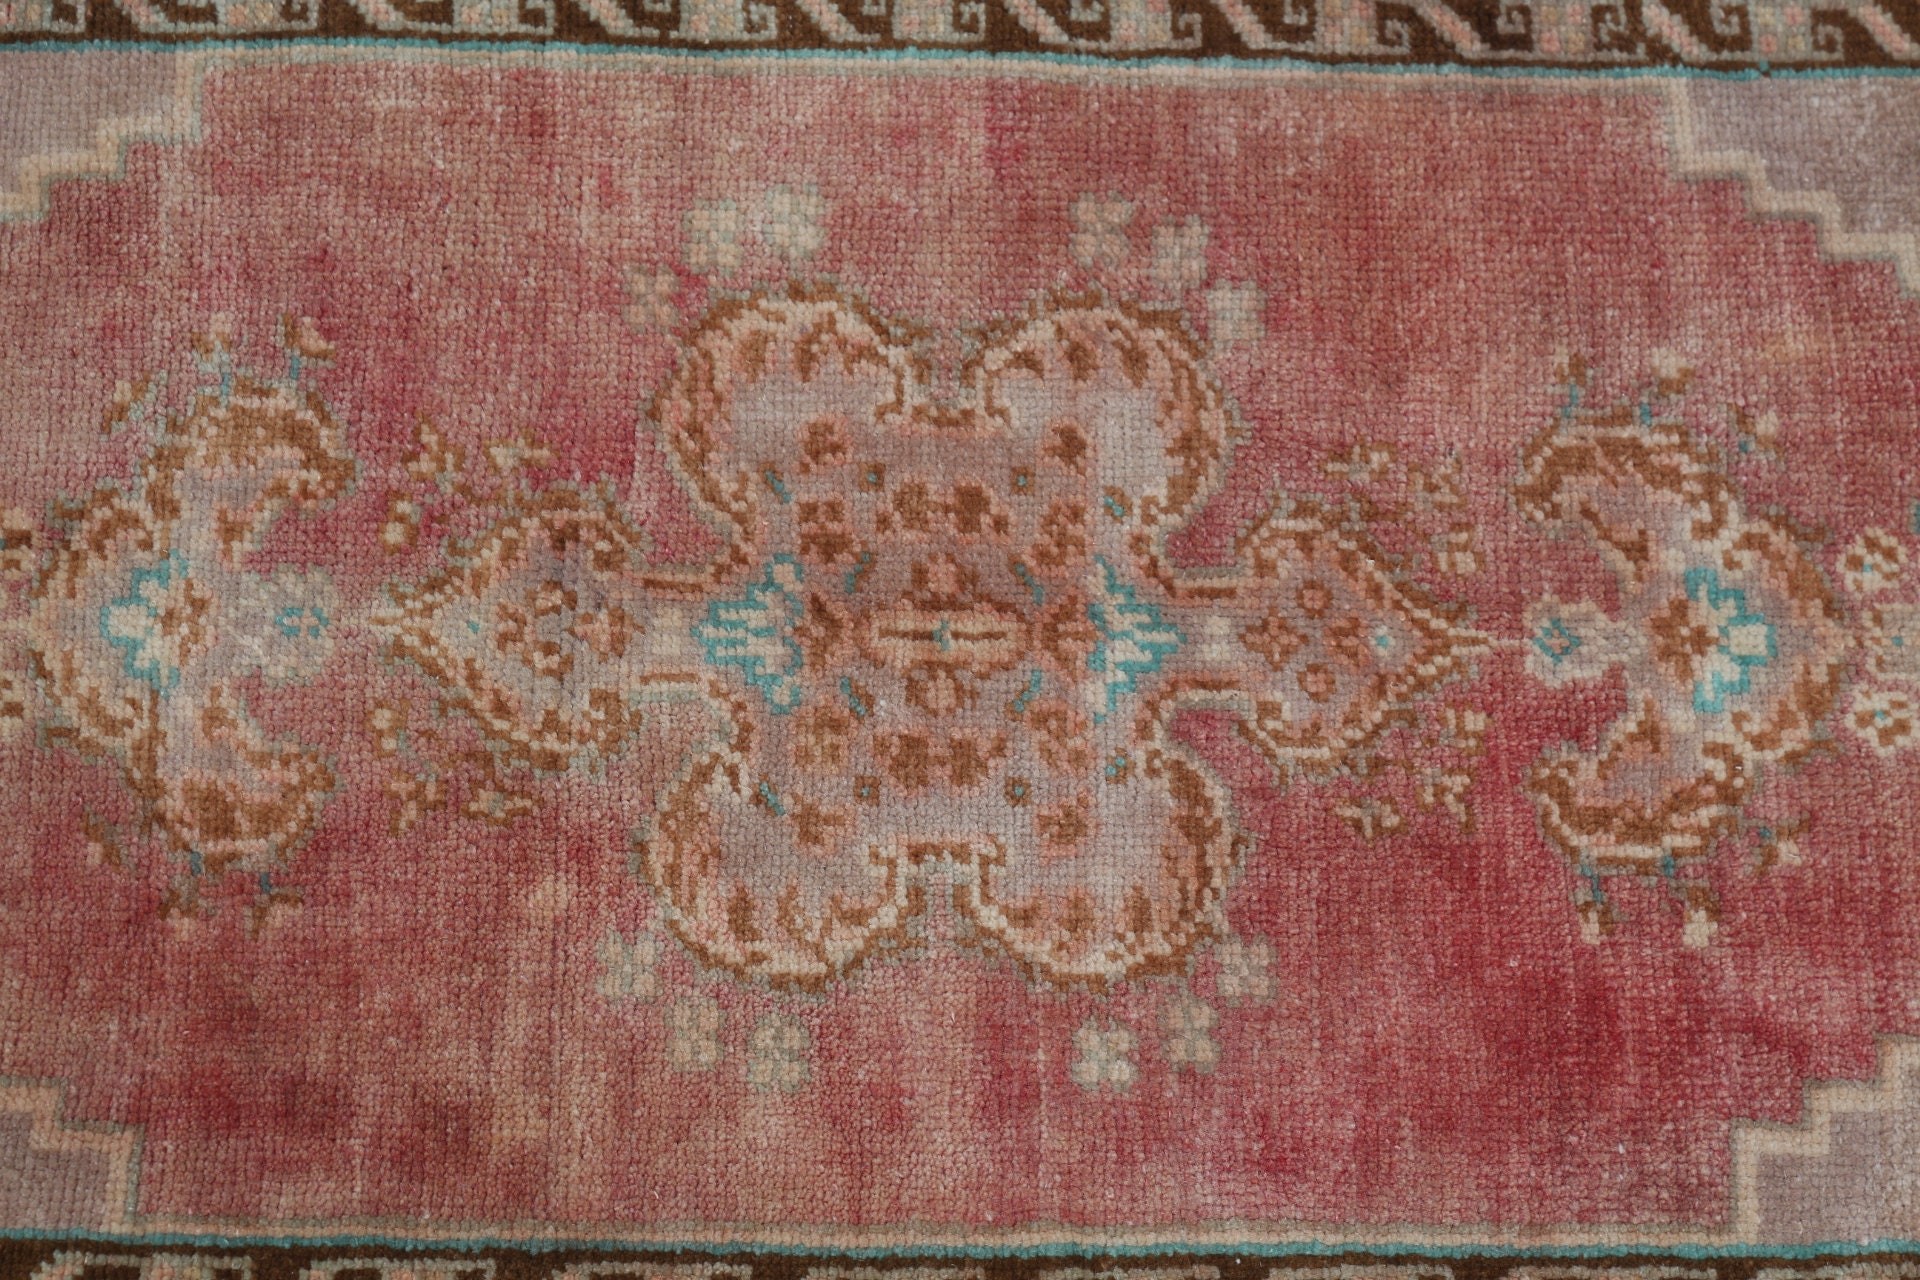 Vintage Rugs, Pink Wool Rug, Antique Rug, 1.6x3.2 ft Small Rug, Turkish Rug, Rugs for Kitchen, Entry Rug, Nursery Rugs